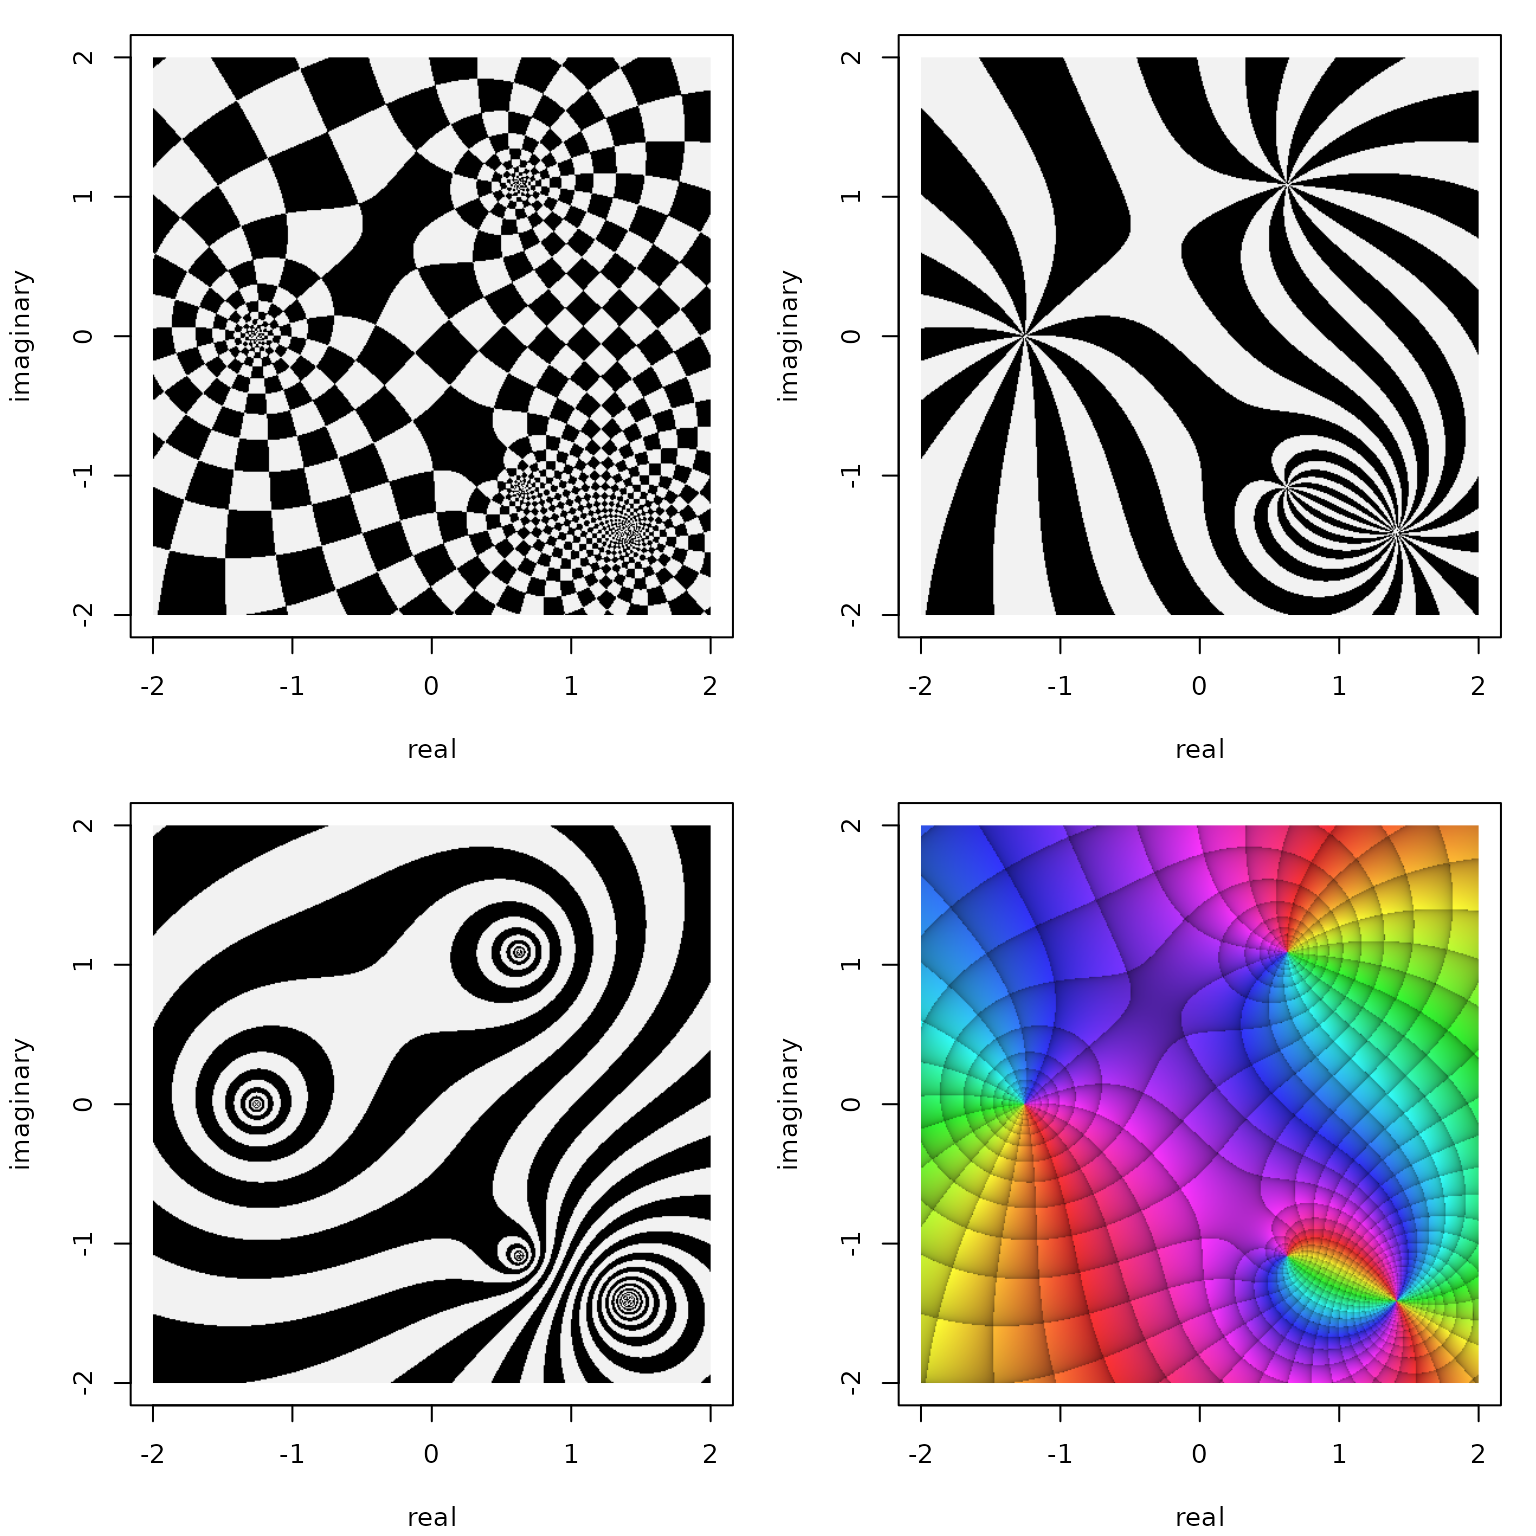 Two color portraits of the function $f(z)=\frac{(z+\sqrt{2}\cdot\mathrm{i}-\sqrt{2})^2}{z^3 + 2}$ made with `phasePortraitBw` and `byType` 'ma' (top left), 'a' (top right), and 'm' (bottom left) together with a full phasePortrait (bottom right).